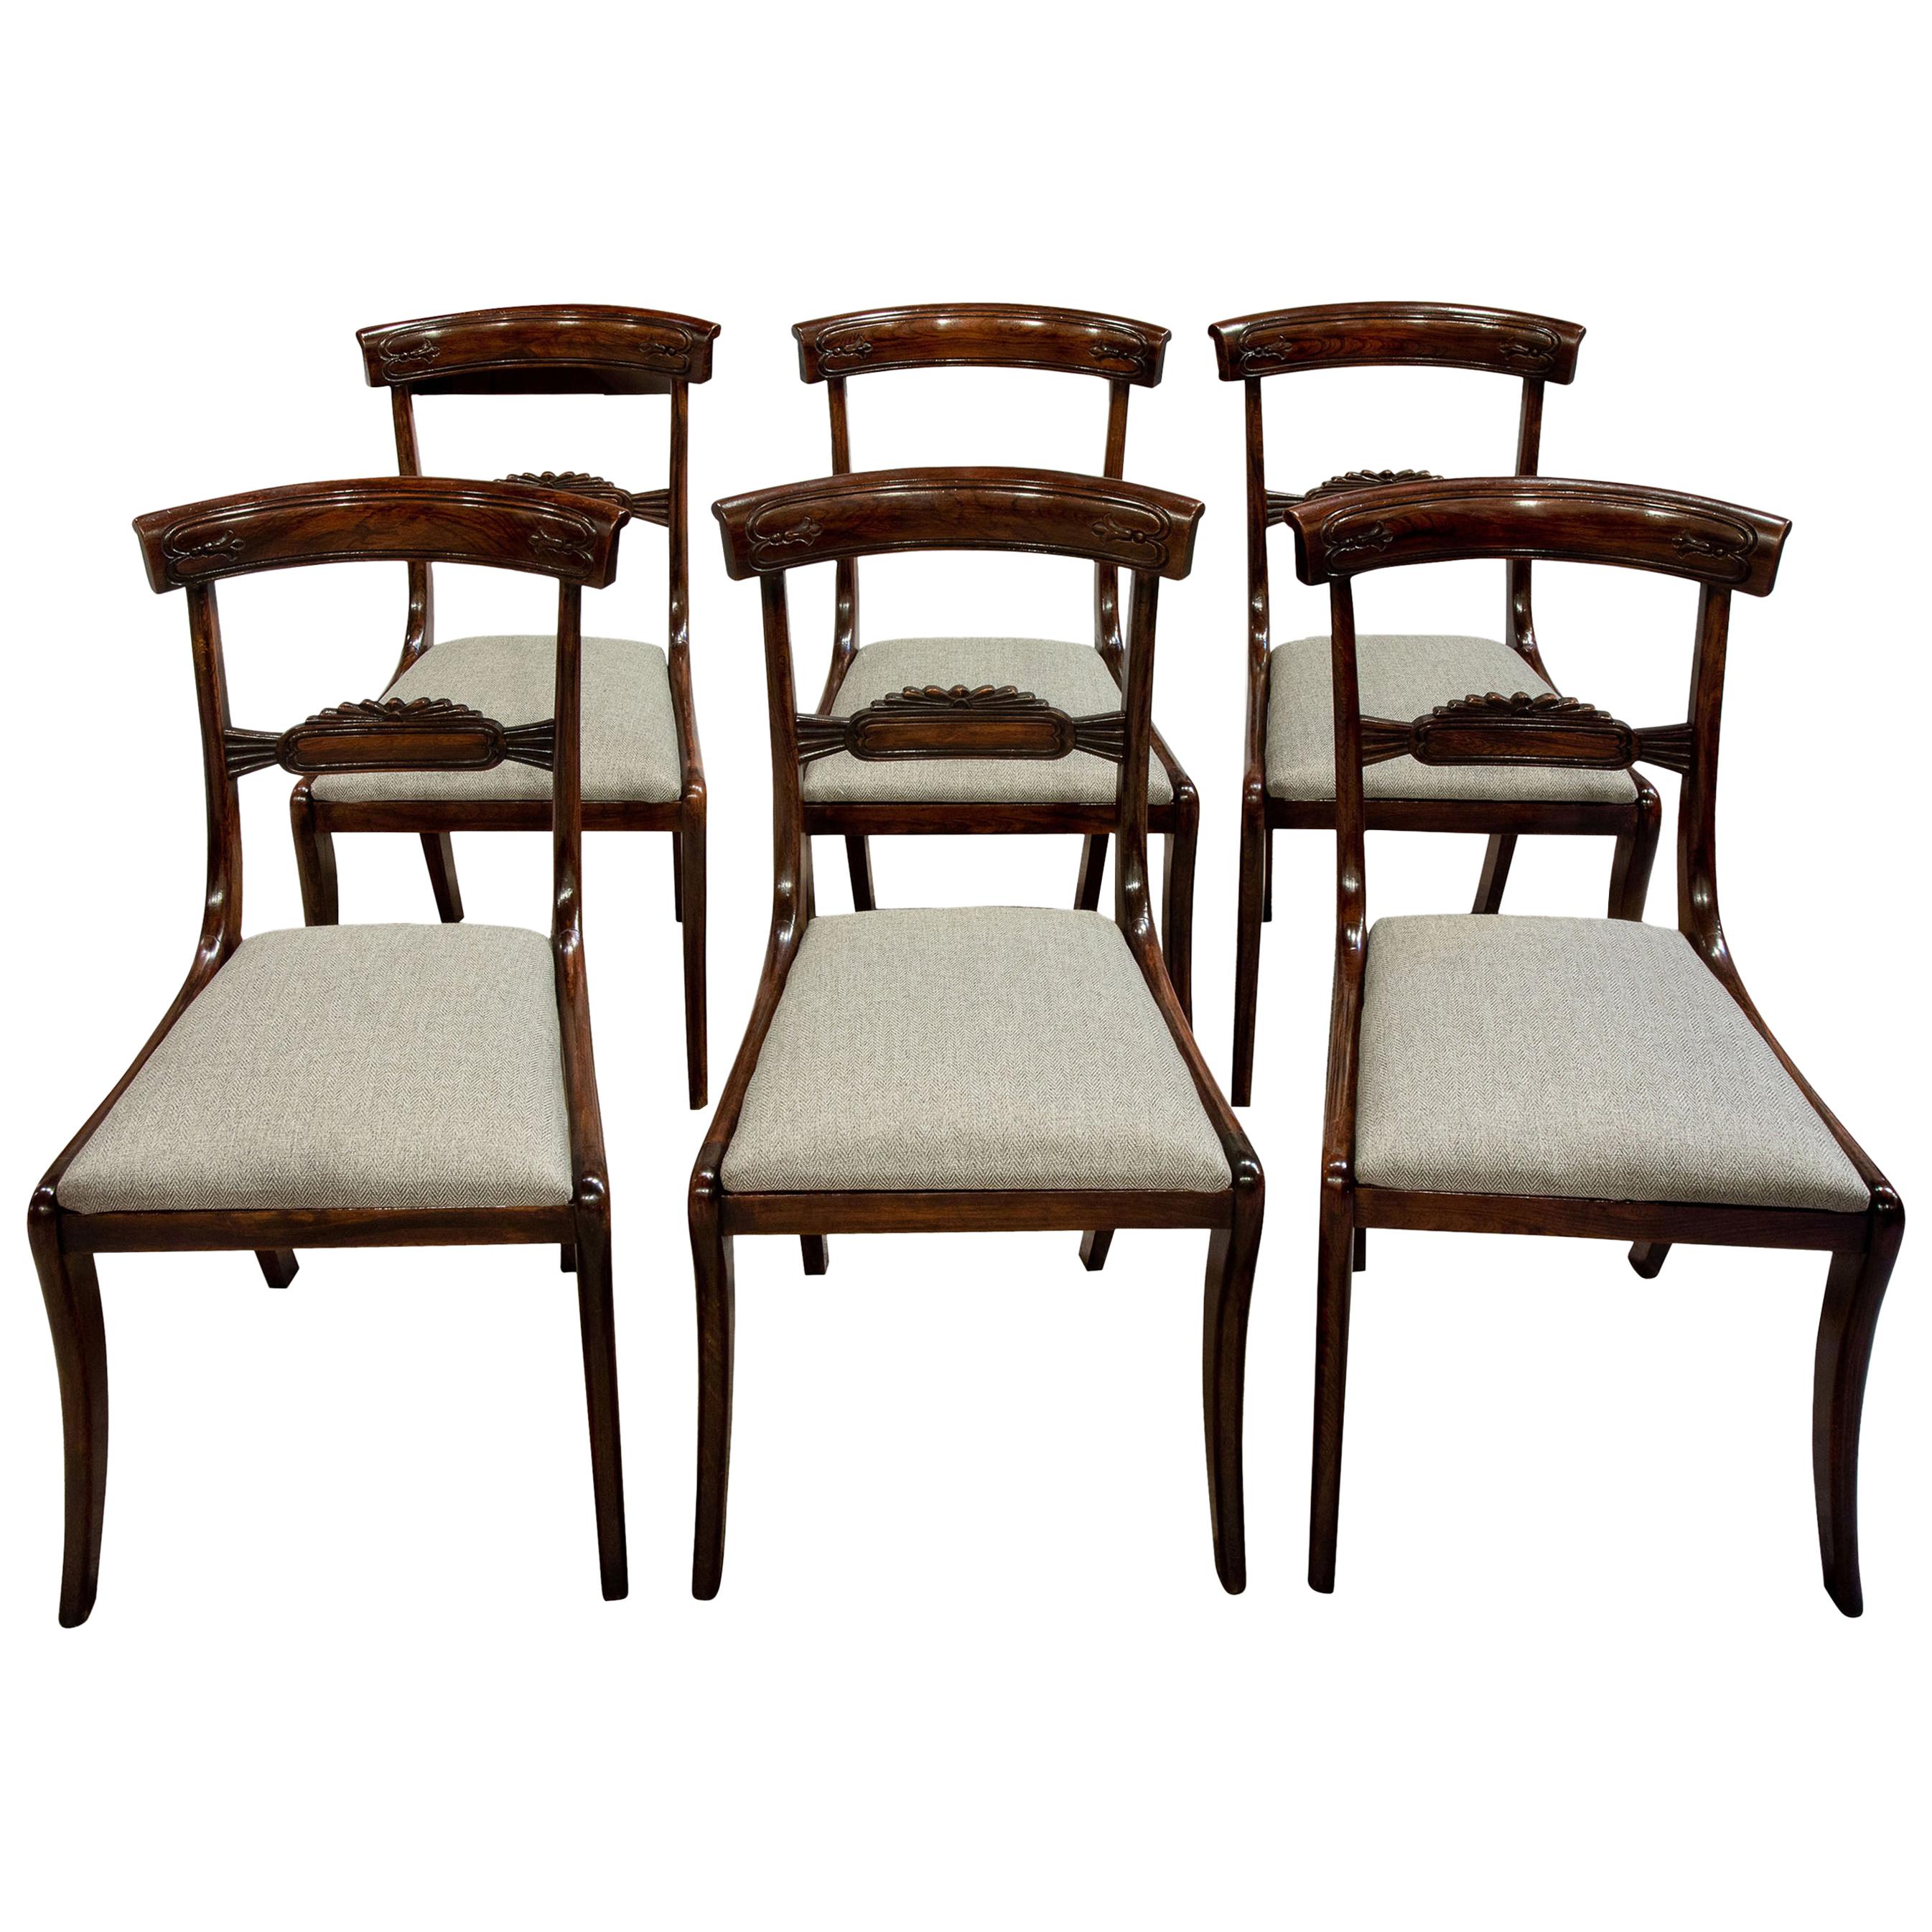 Set of Six Regency Beech Chairs with Original Rosewood Graining, circa 1830 For Sale